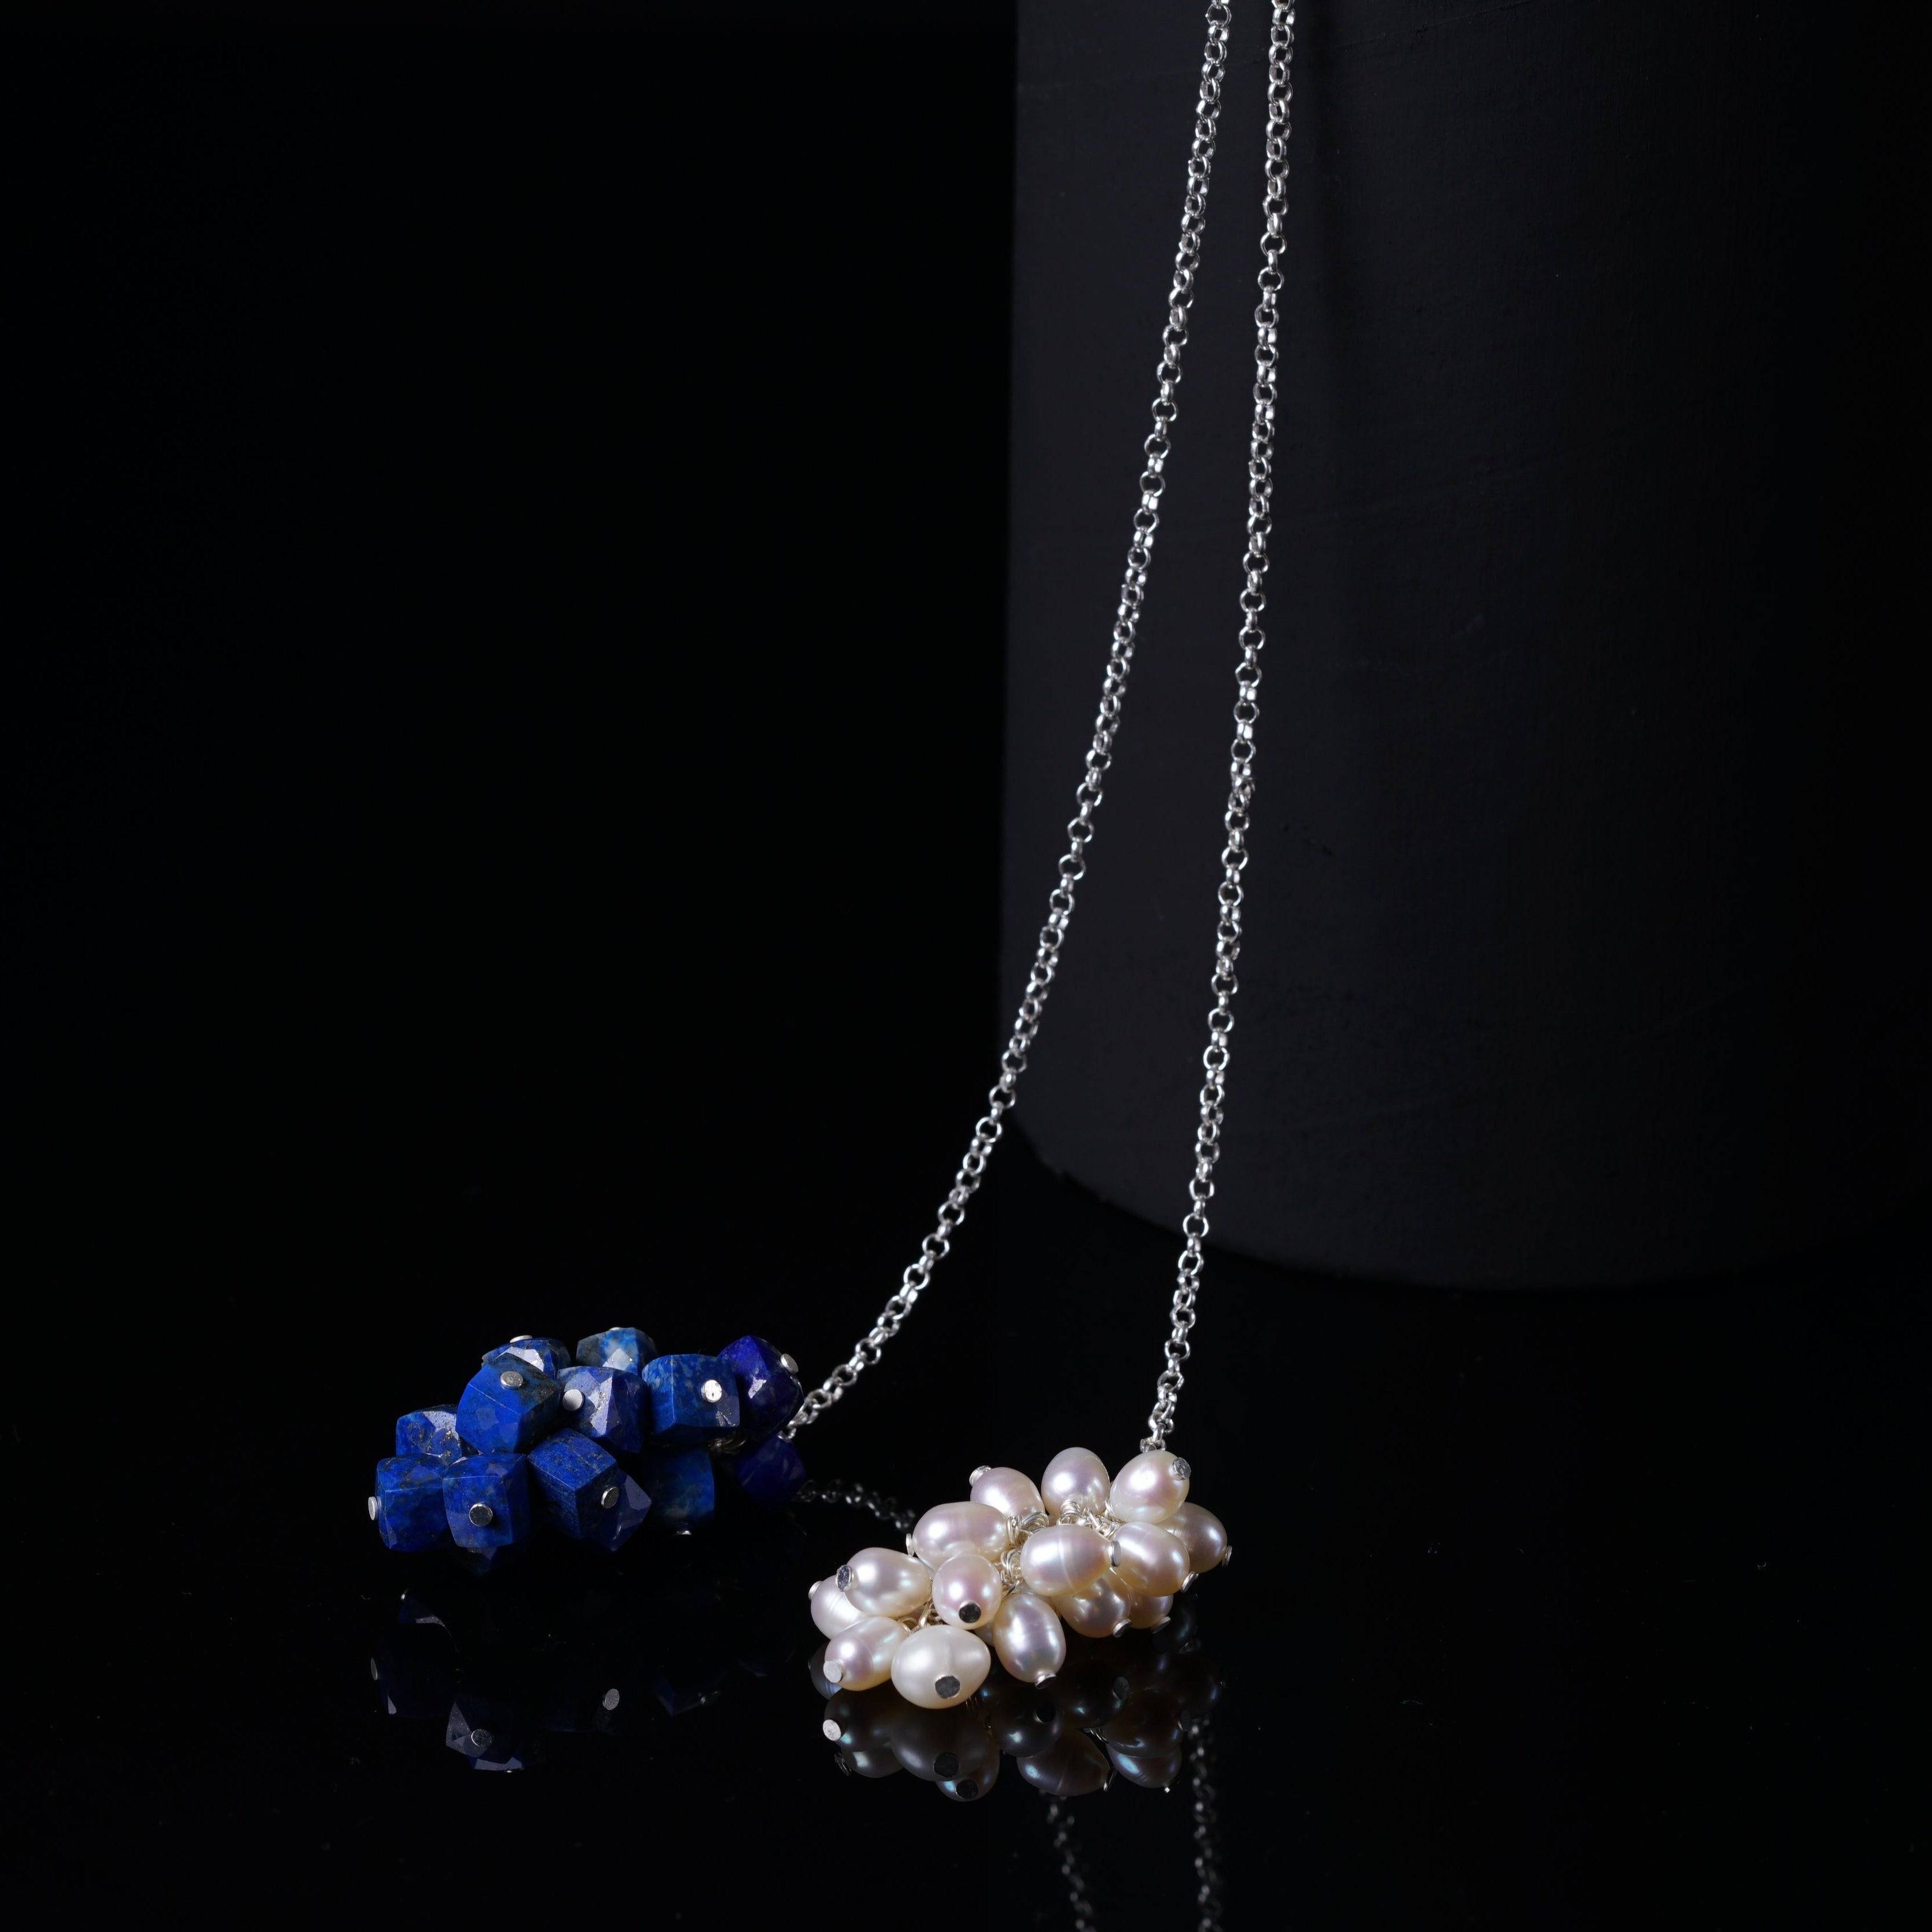 Tie and Wear Necklace : Lapis and Fresh Water Pearls